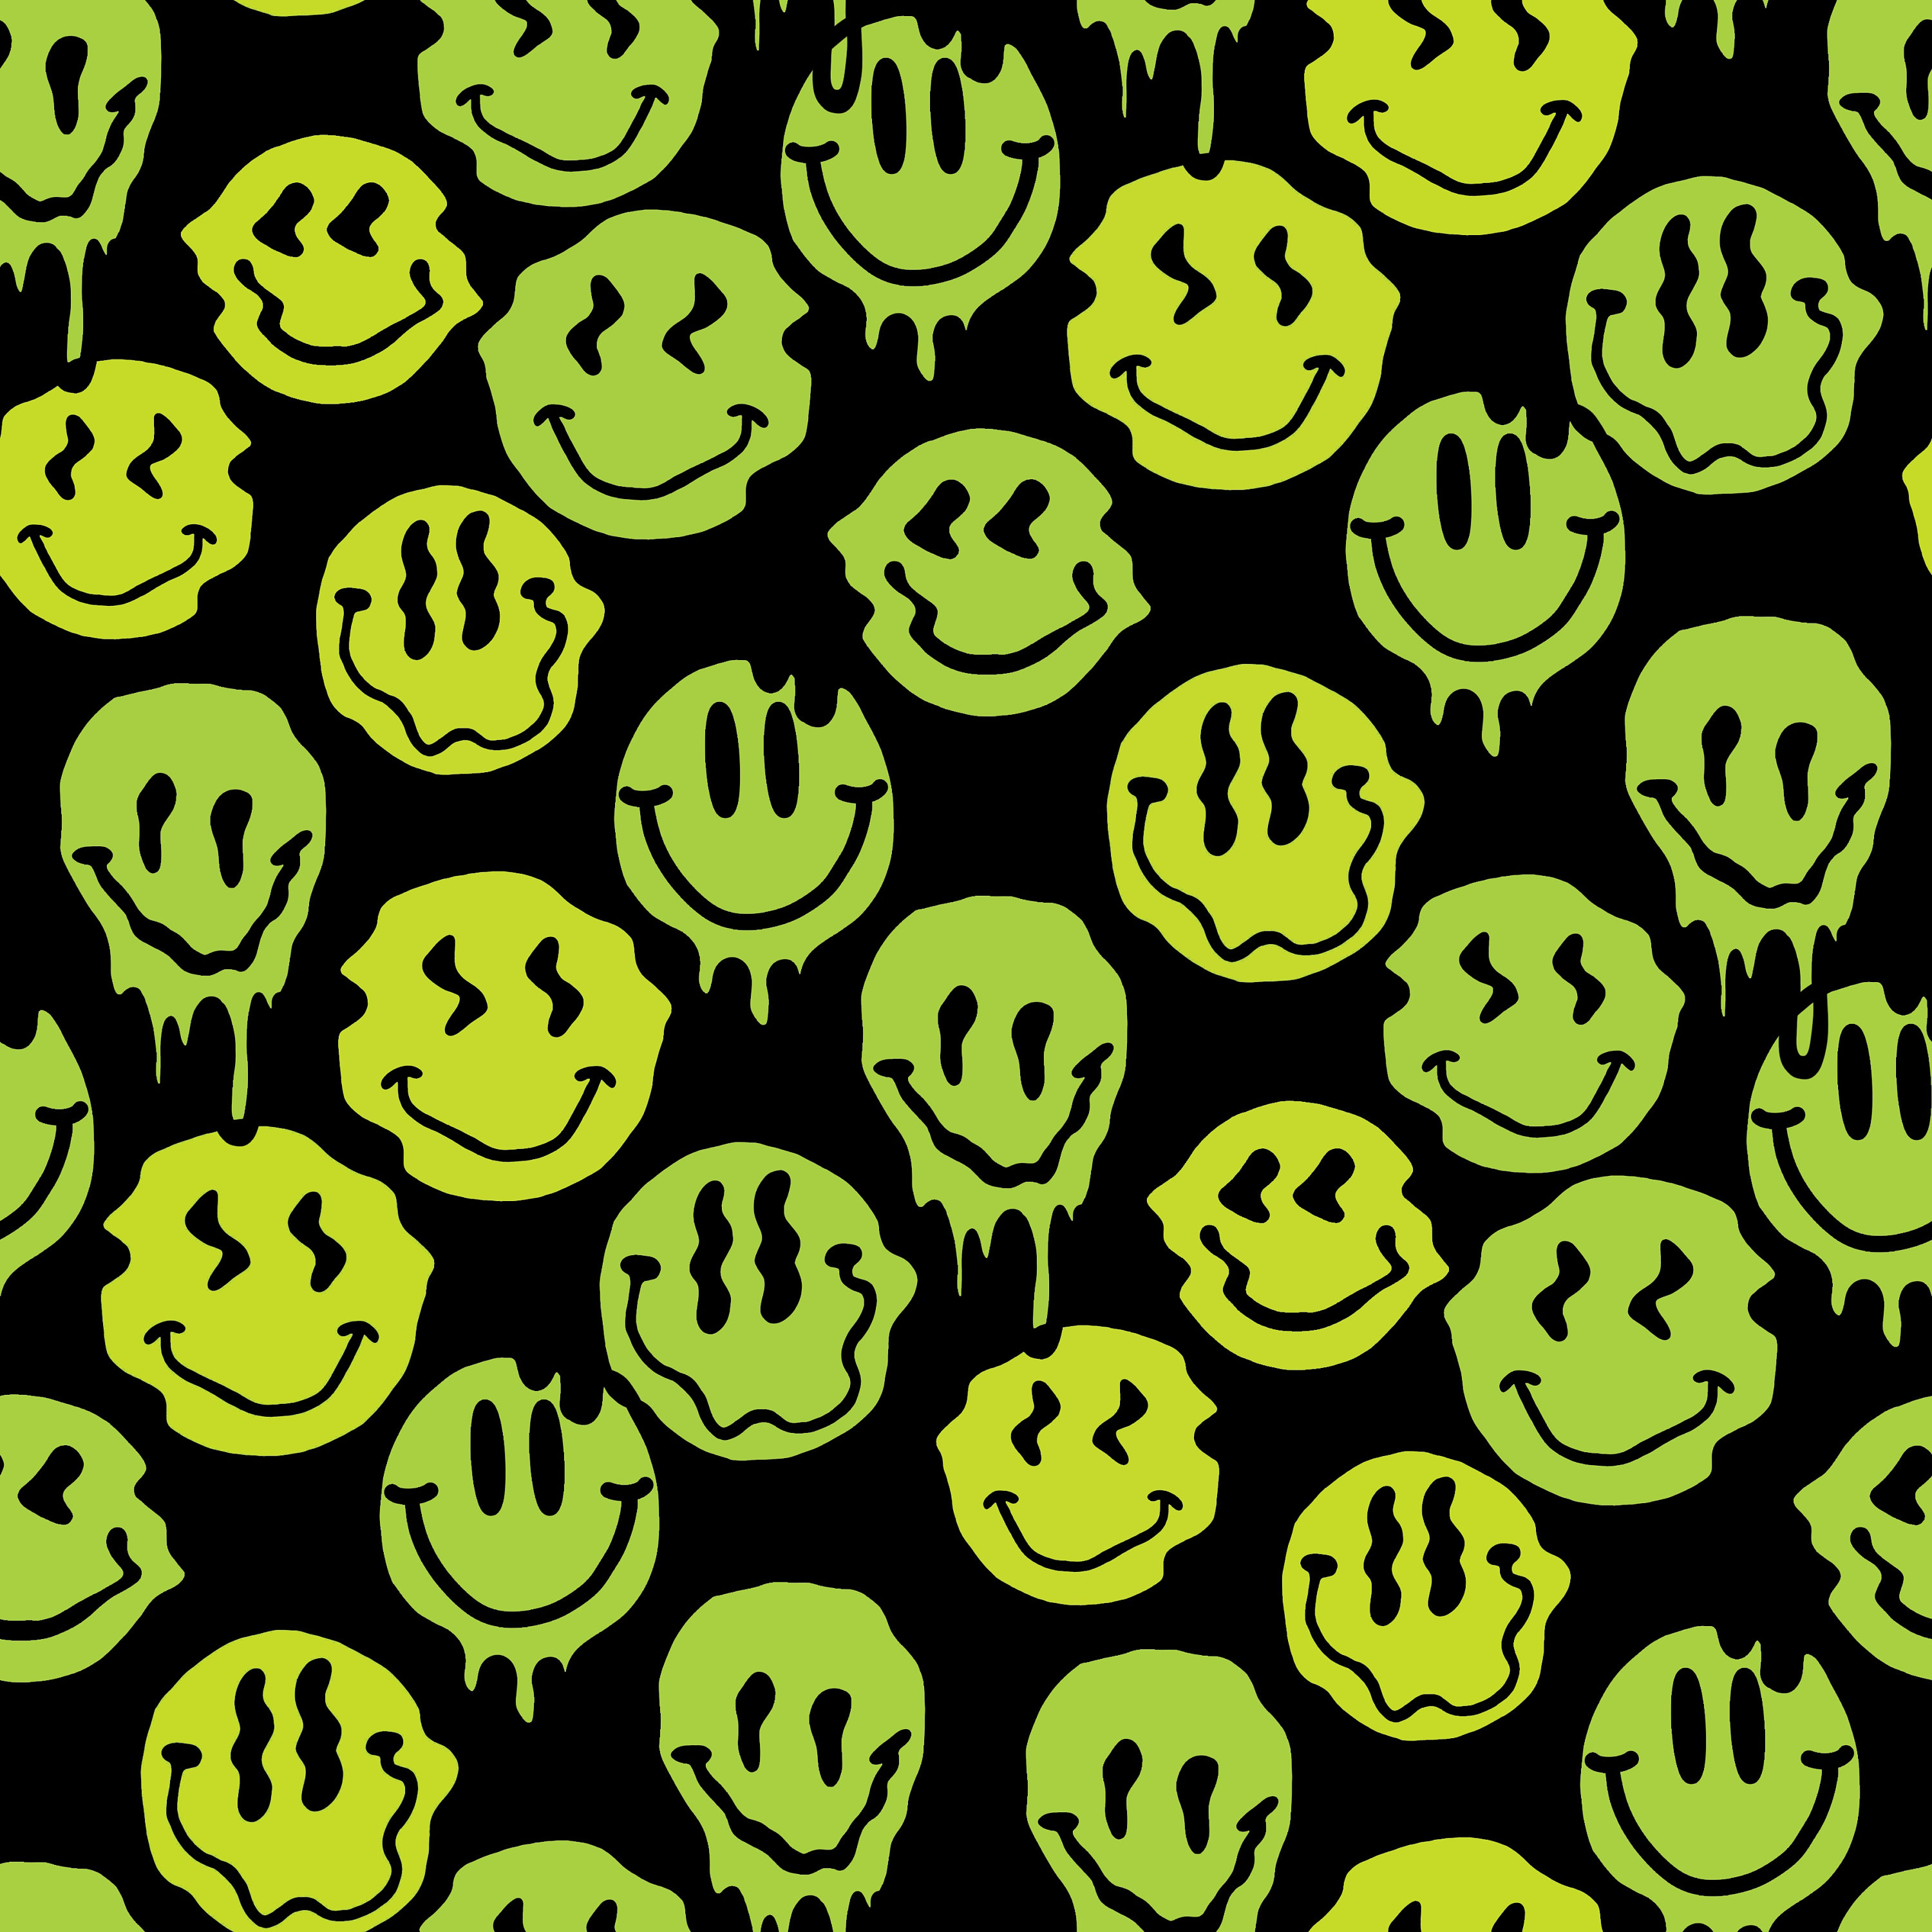 Trippy Smile Face Seamless Repeat Pattern Commercial Use OK